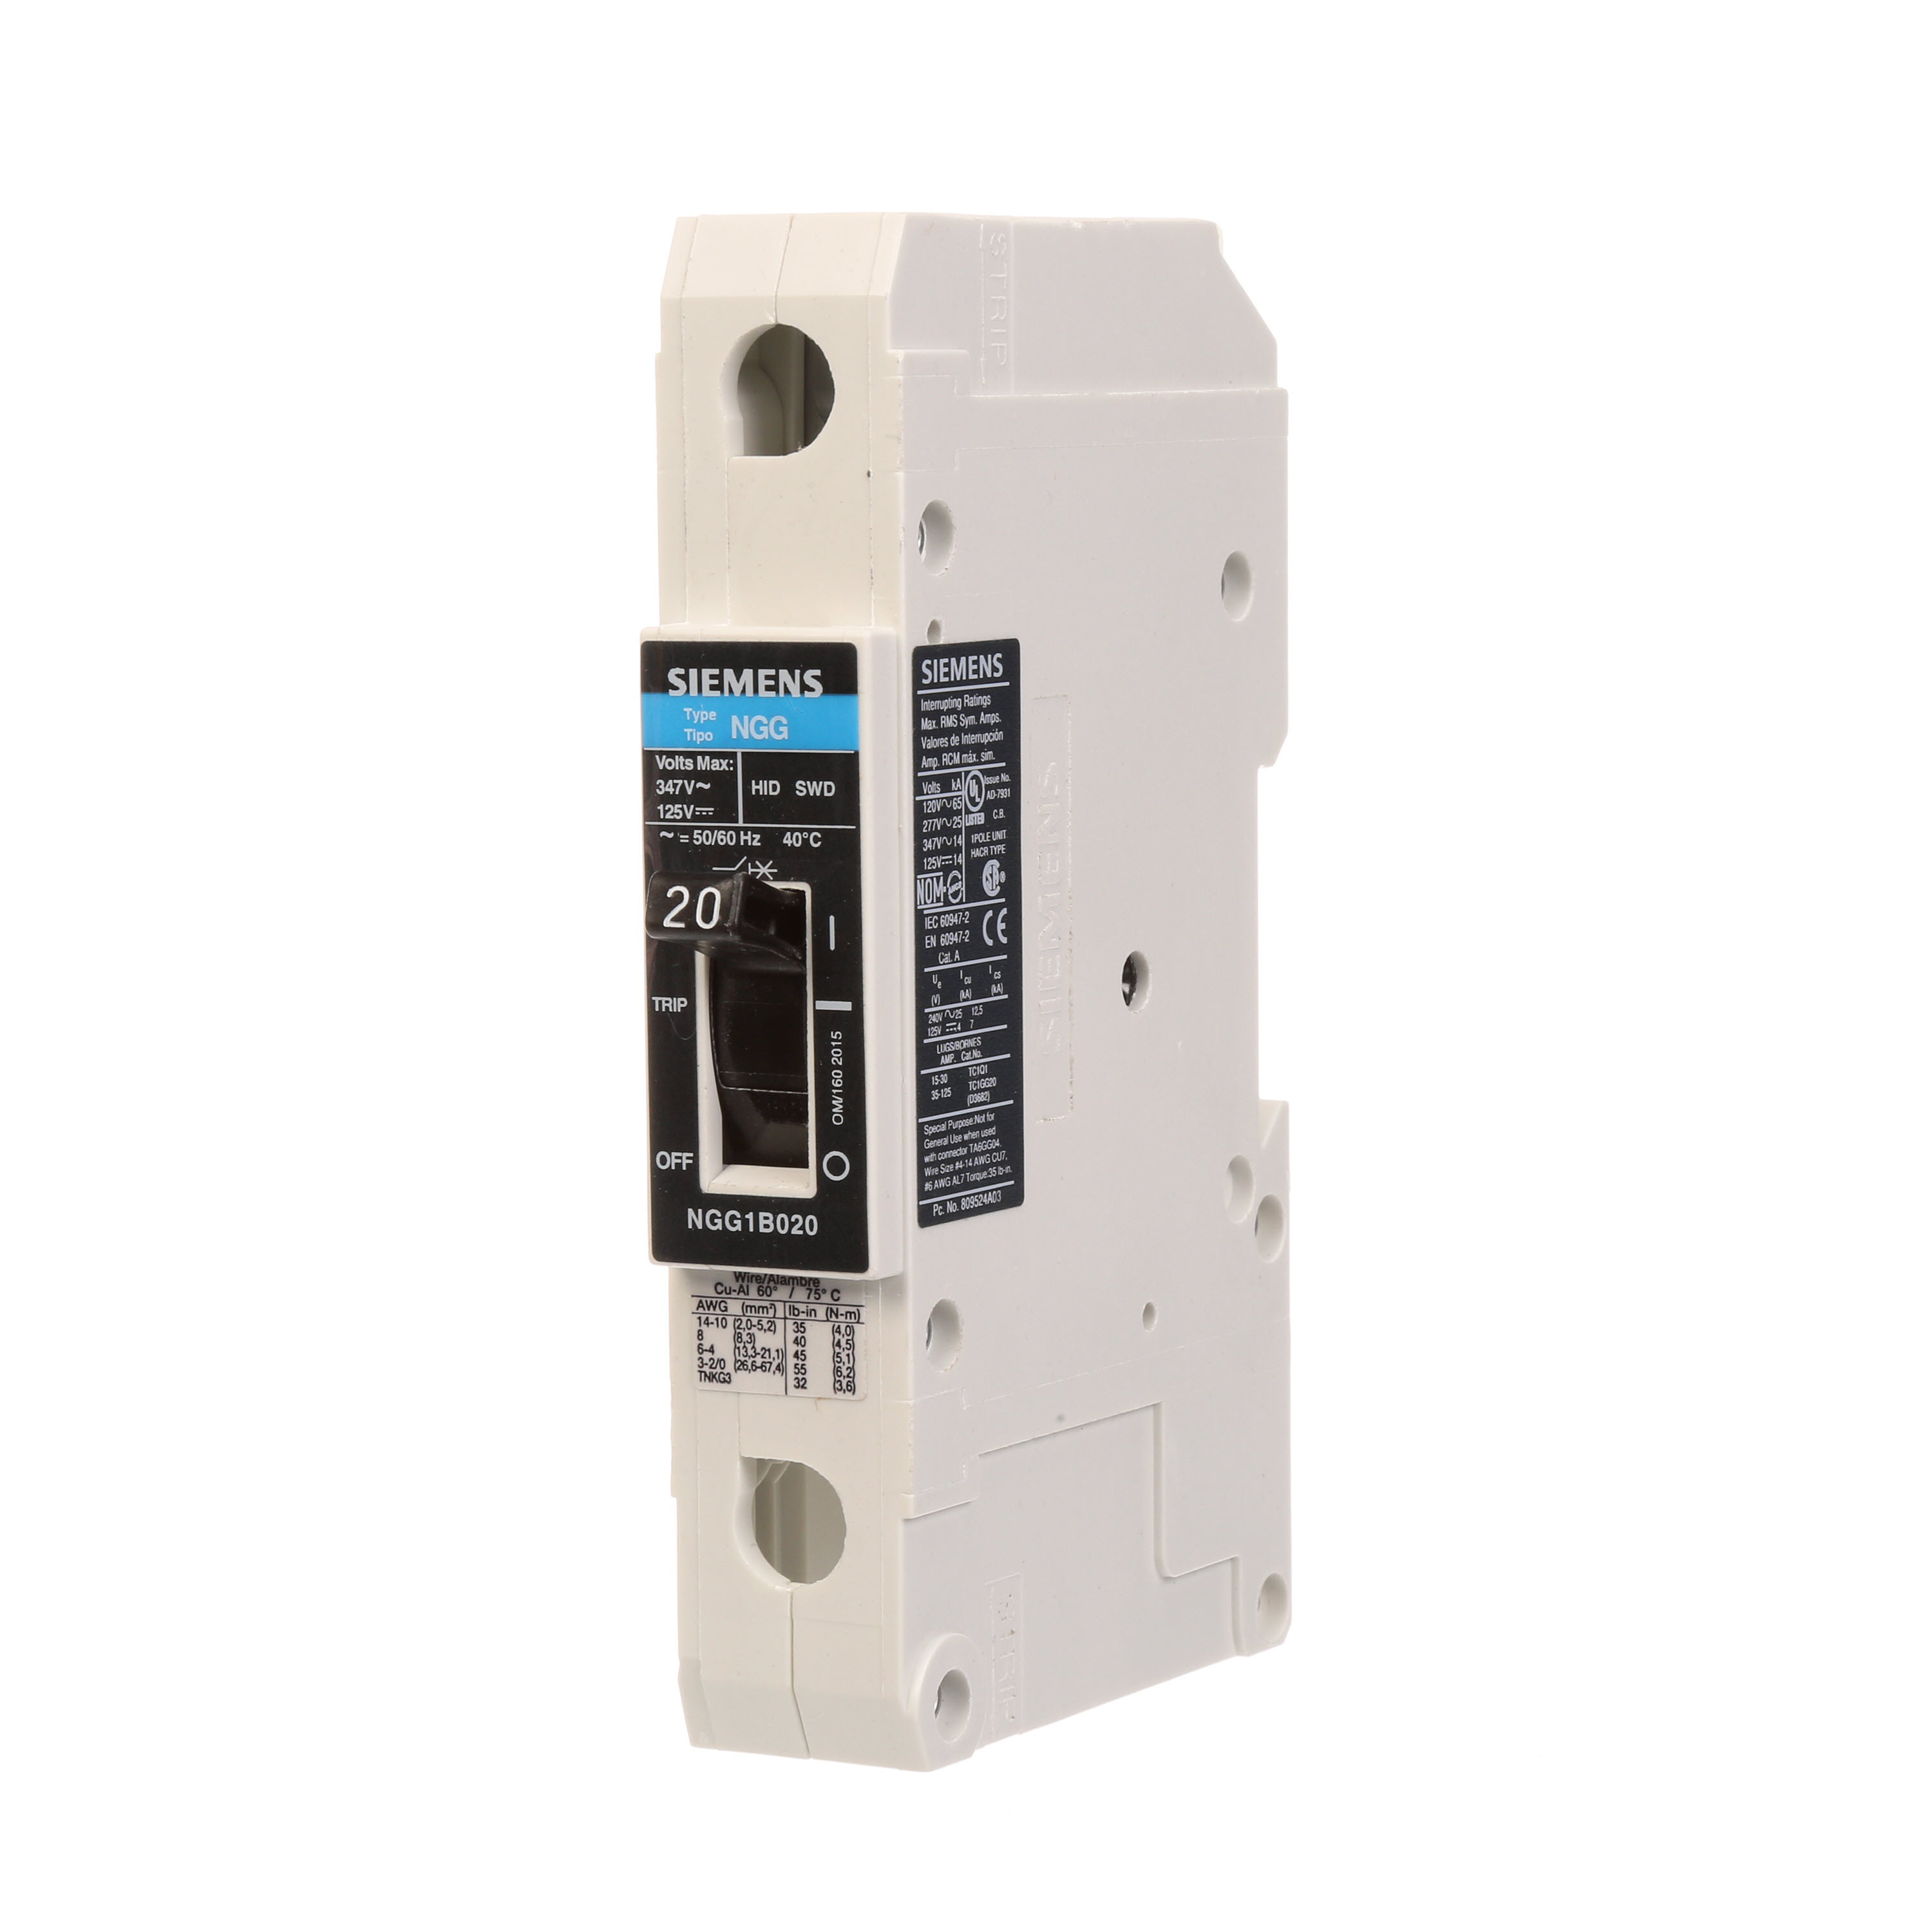 SIEMENS LOW VOLTAGE G FRAME CIRCUIT BREAKER WITH THERMAL - MAGNETIC TRIP. UL LISTED NGG FRAME WITH STANDARD BREAKING CAPACITY. 20A 1-POLE (14KAIC AT 347V) (25KAIC AT 277V). SPECIAL FEATURES MOUNTS ON DIN RAIL / SCREW, NO LUGS. DIMENSIONS (W x H x D) IN 1 x 5.4 x 2.8.